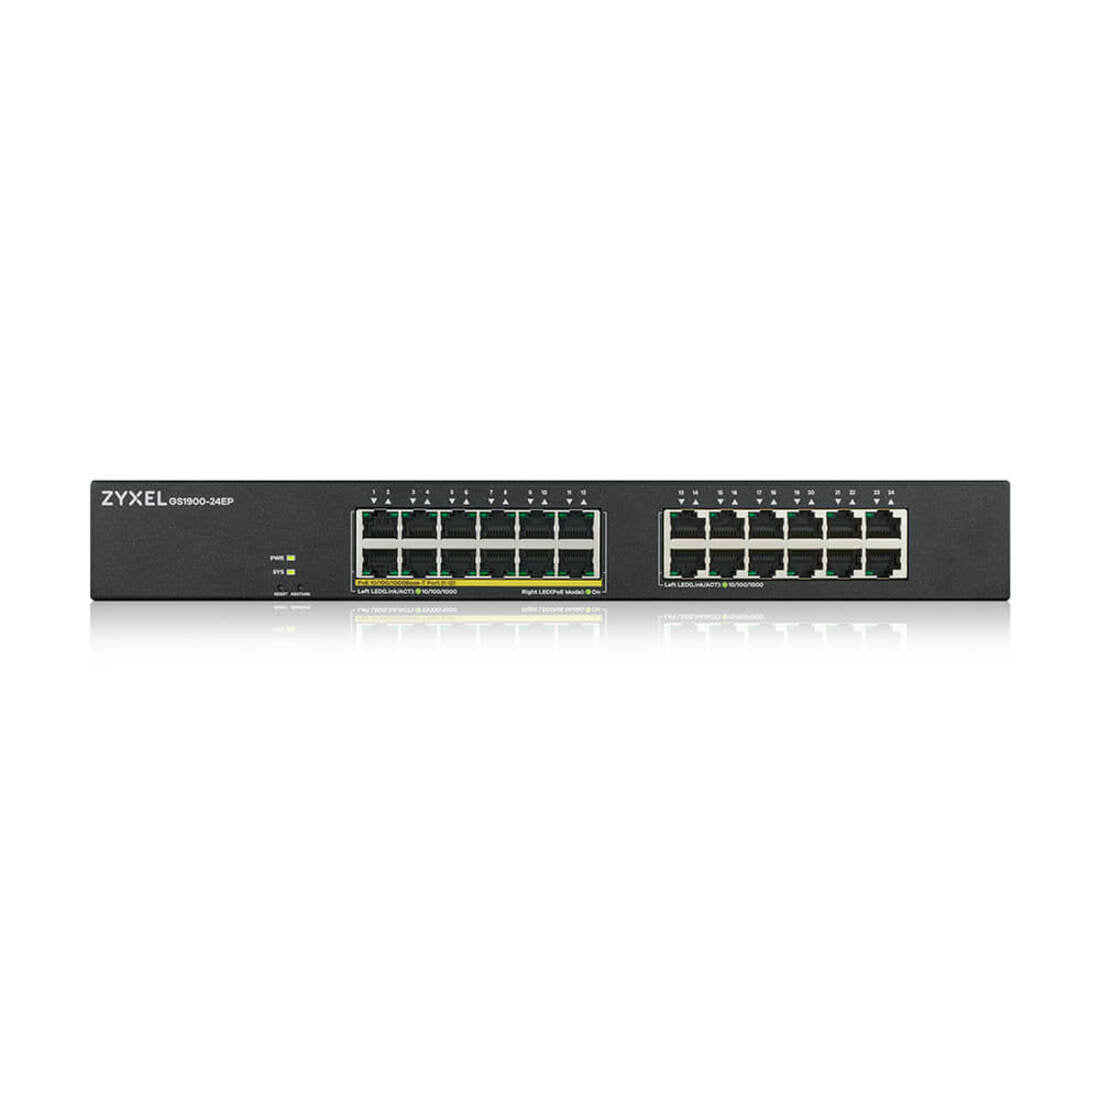 ZYXEL 24-port GbE Smart Managed PoE Switch (GS1900-24EP)